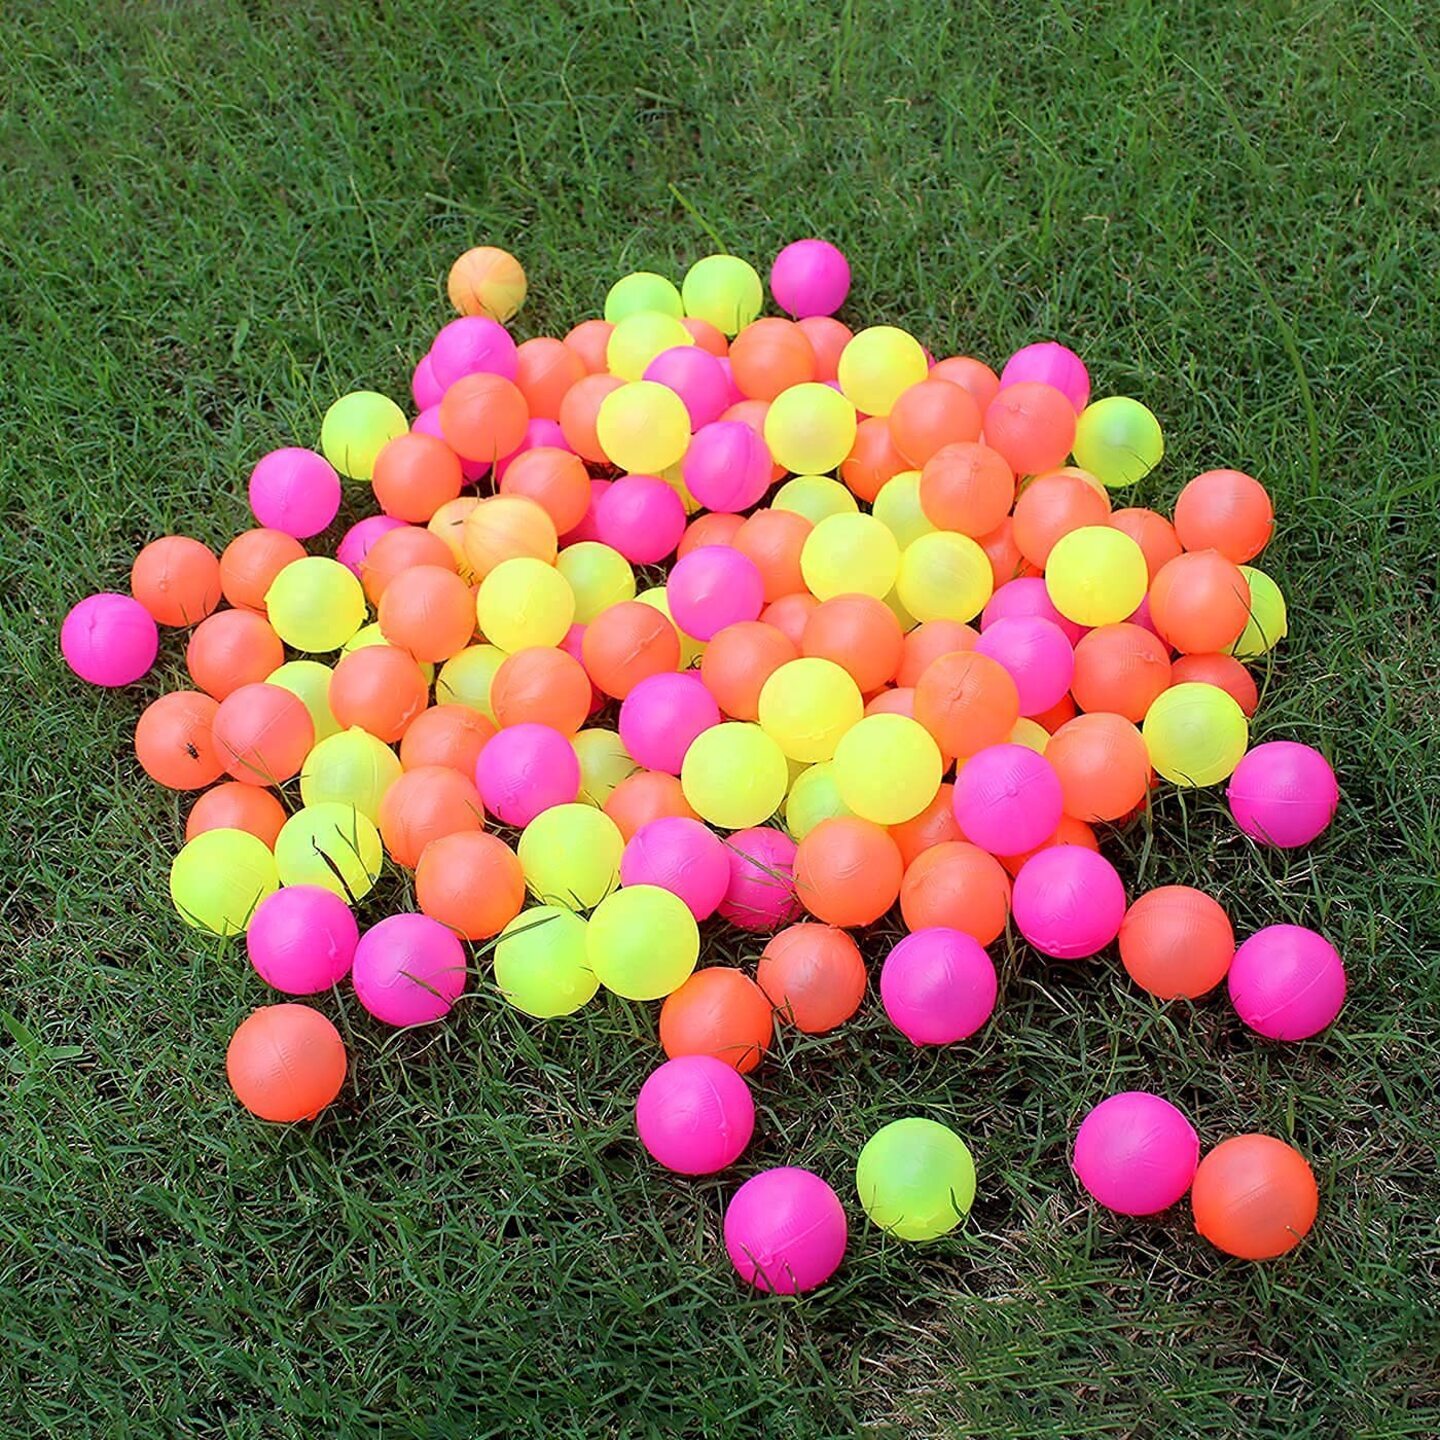 Pack of 125+ Swimming Pool / Bath Tub Colorful Water Balls